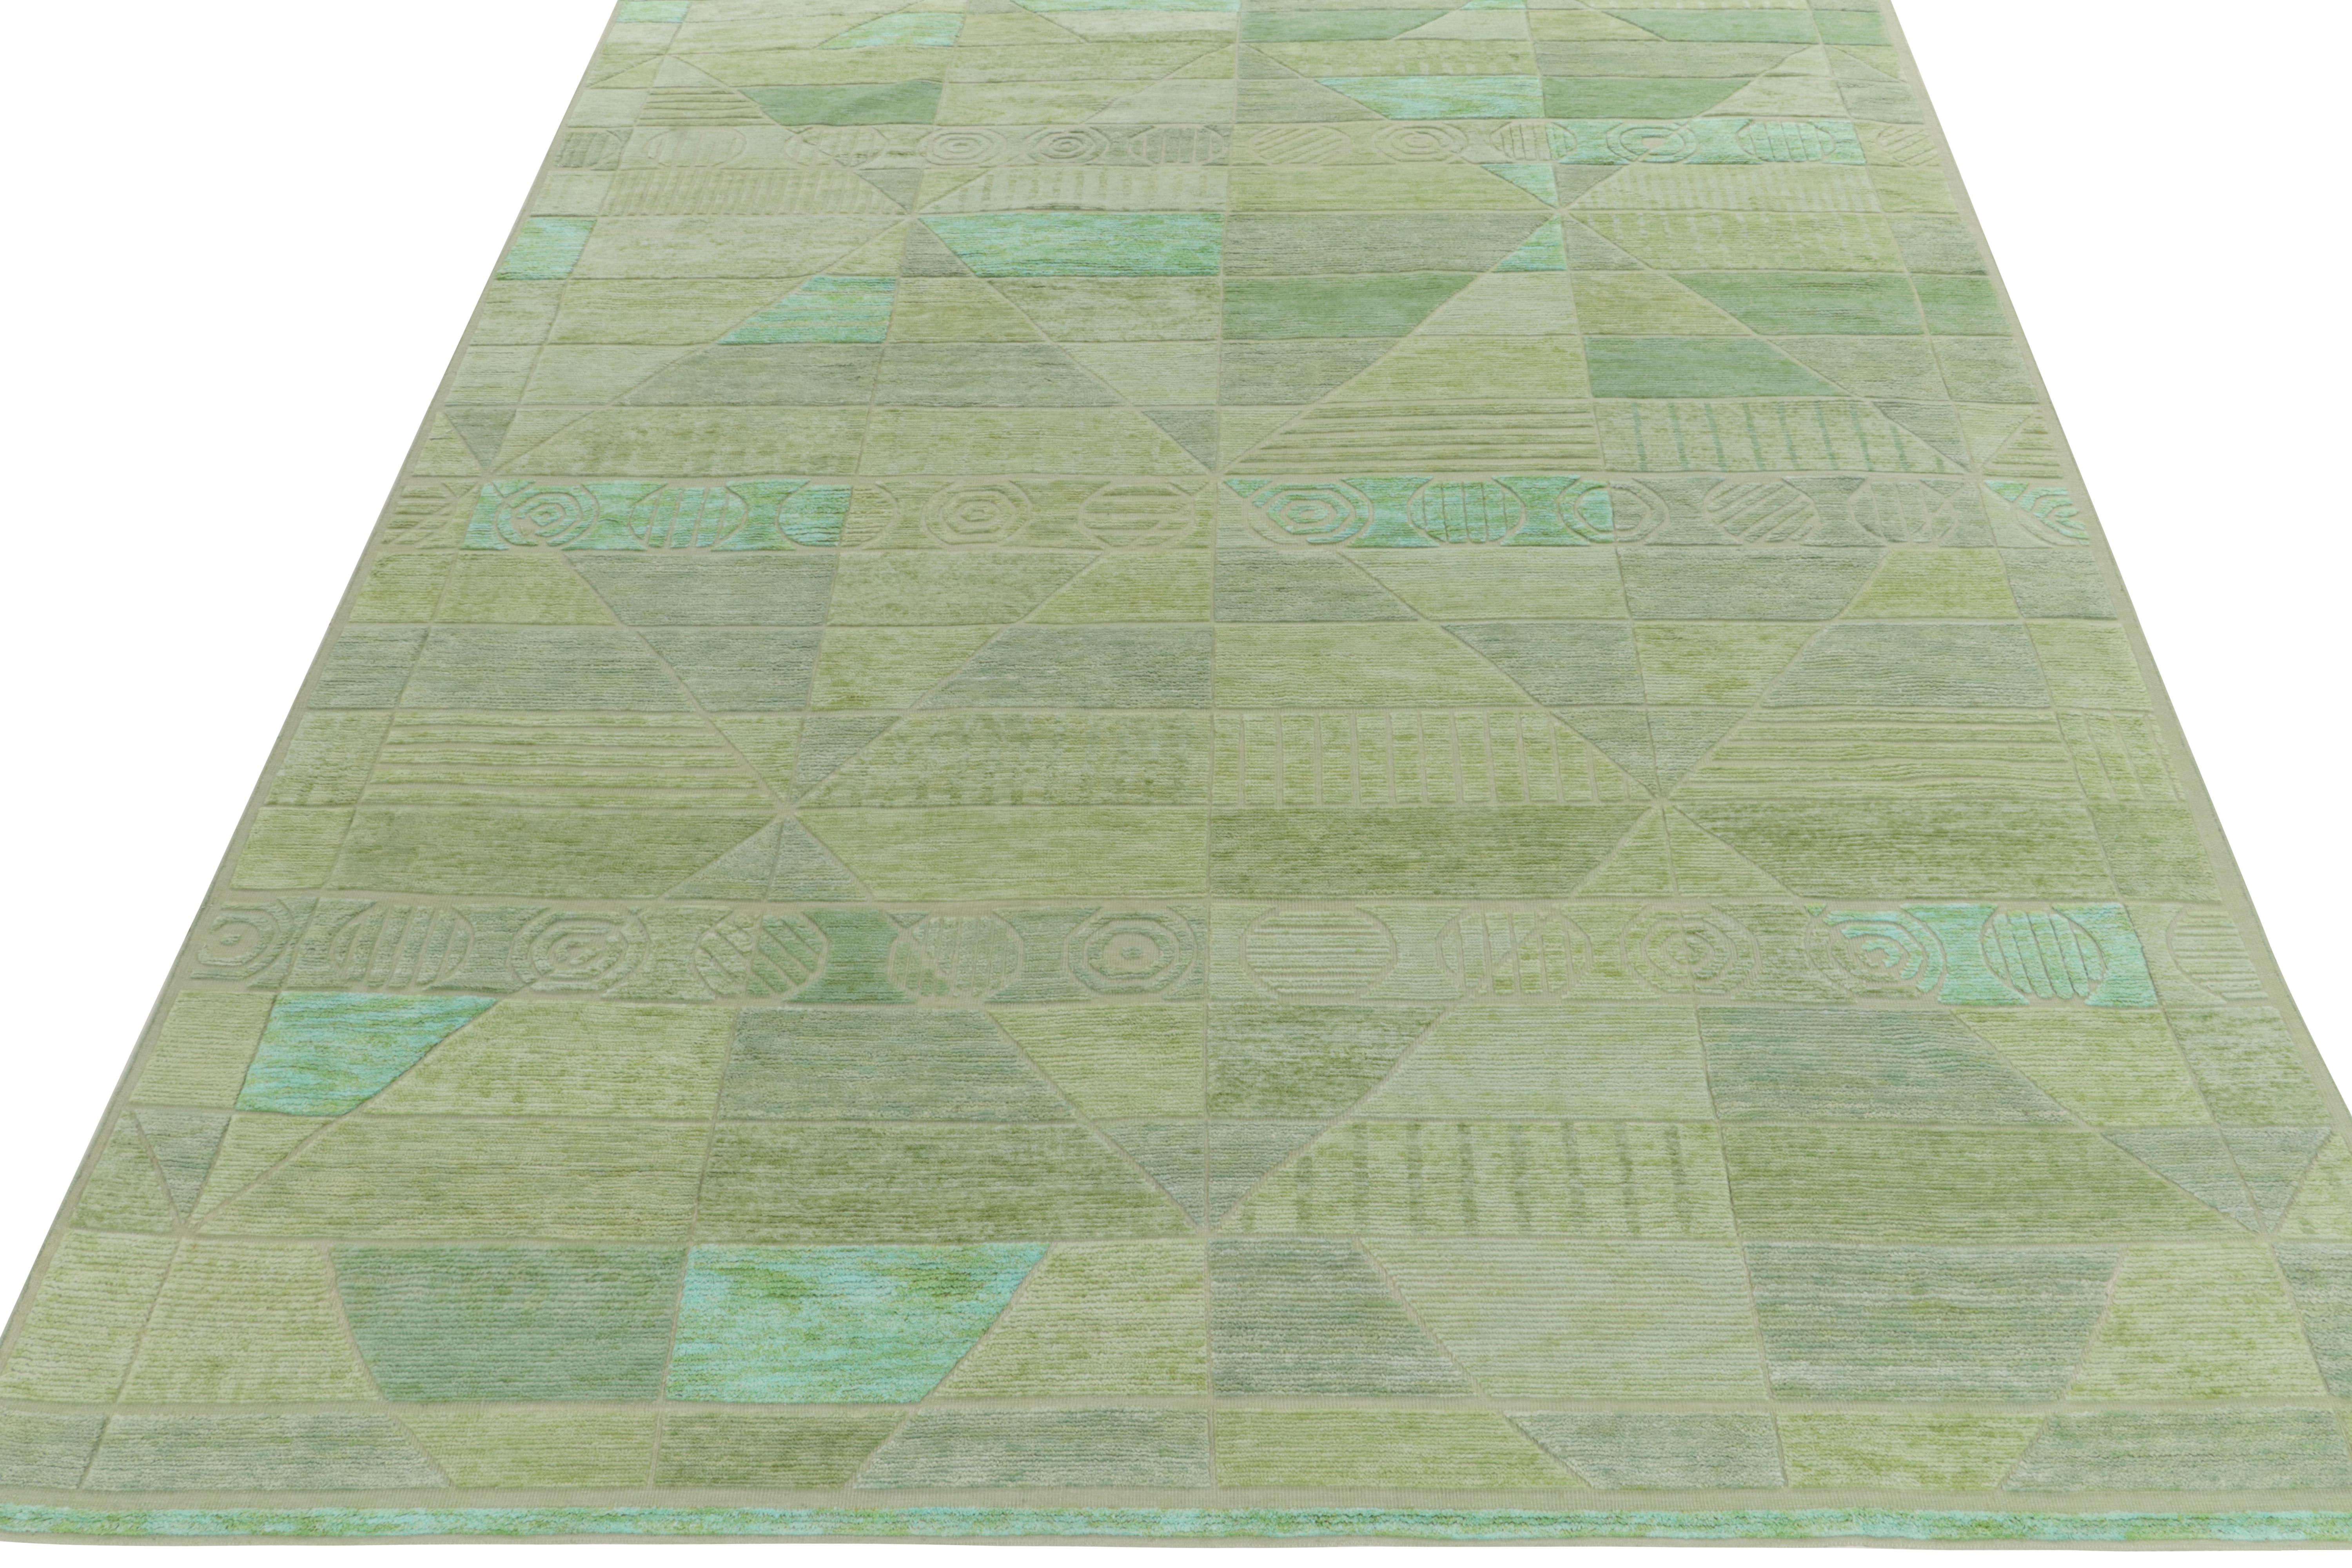 A 9x12 pile rug from our award-winning Scandinavian Collection, relishing a fine weave in best quality wool & hemp. The high-low texture brings out the geometry in invigorating tones of lime green, aqua green and light olive playing so graphically